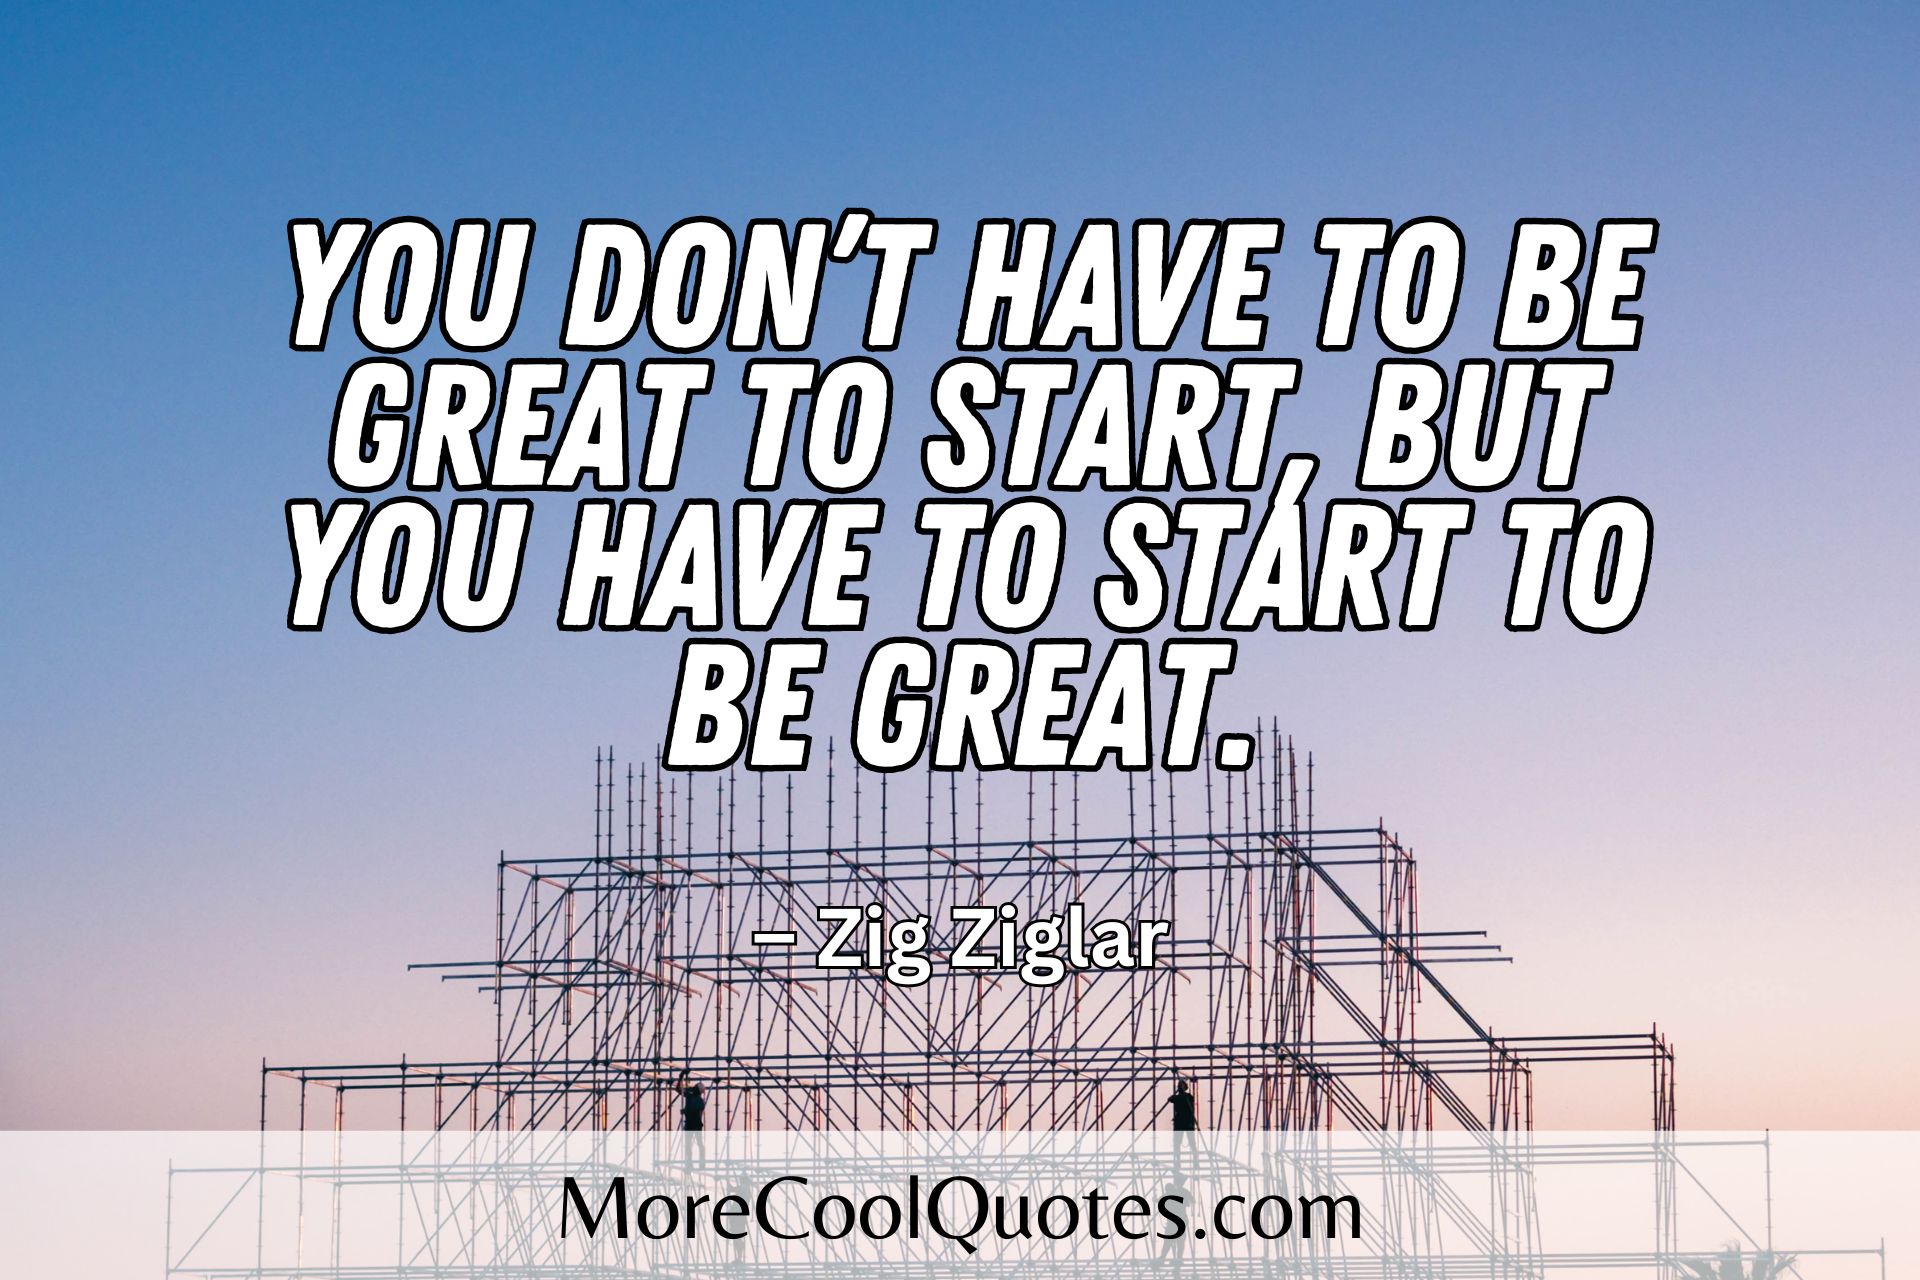 You don’t have to be great to start, but you have to start to be great - zig ziglar quotes